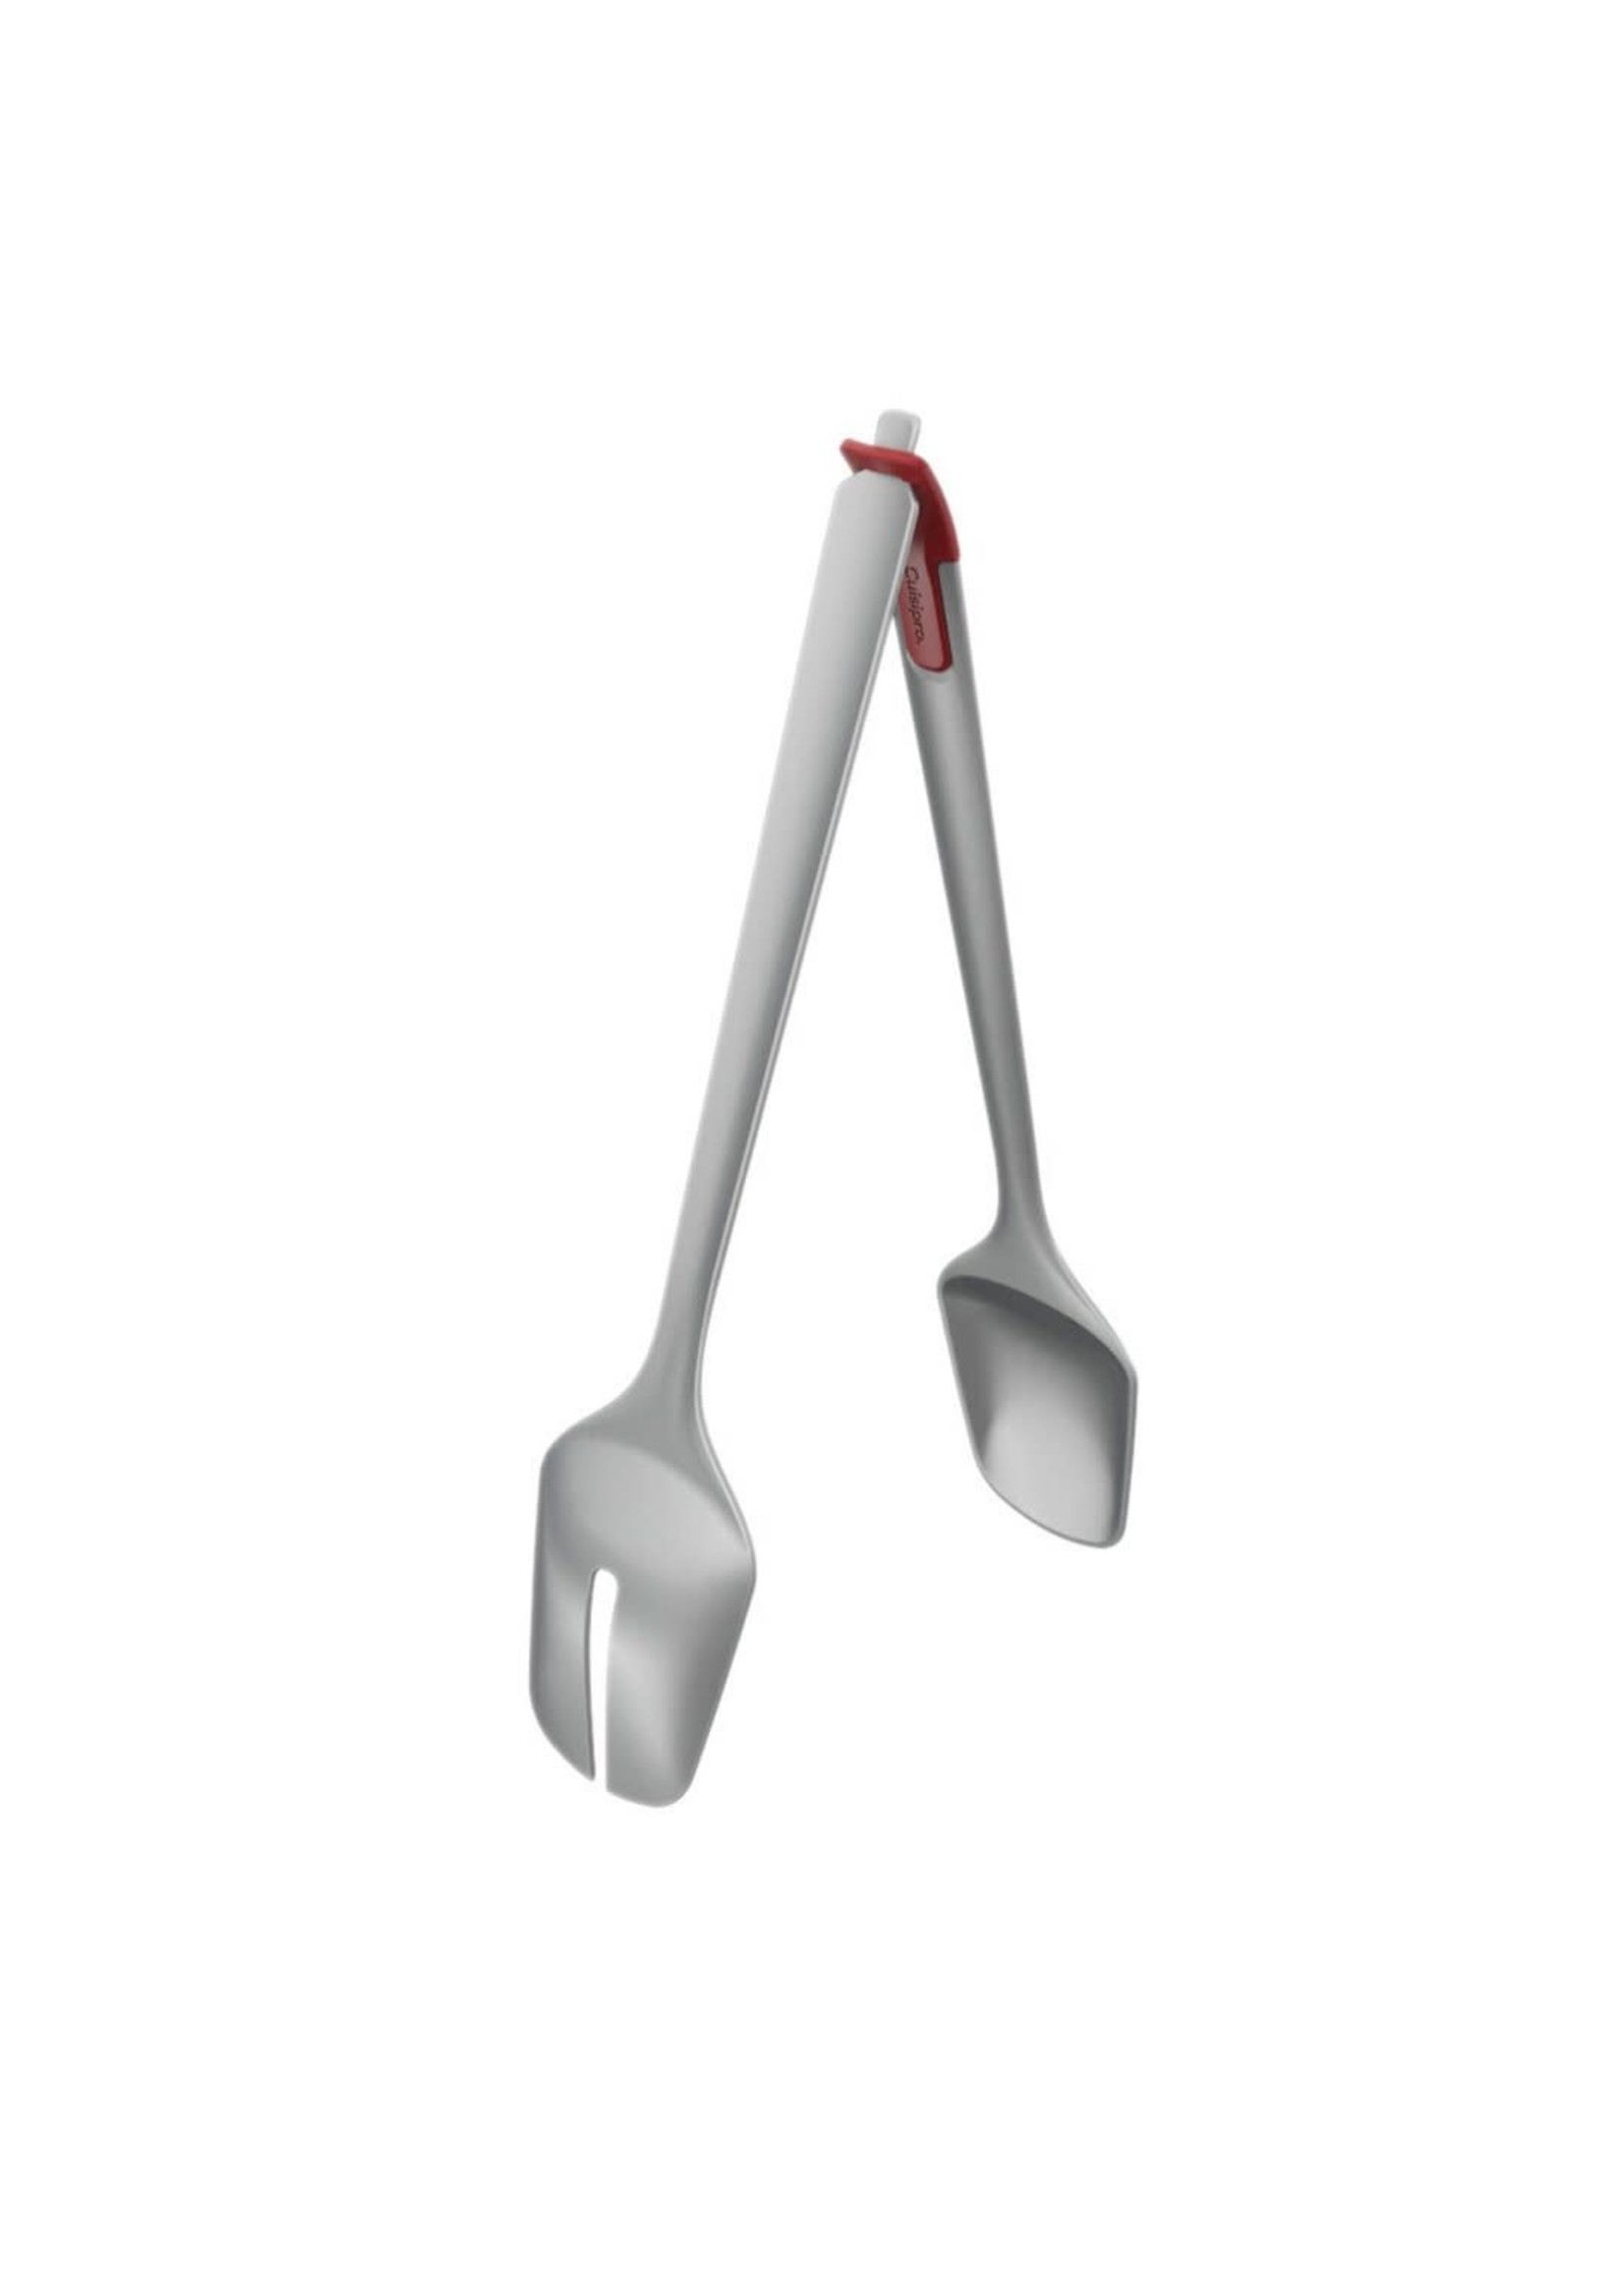 https://cdn.shoplightspeed.com/shops/617932/files/39089371/1652x2313x2/browne-cuisipro-cuisipro-stainless-salad-tongs.jpg